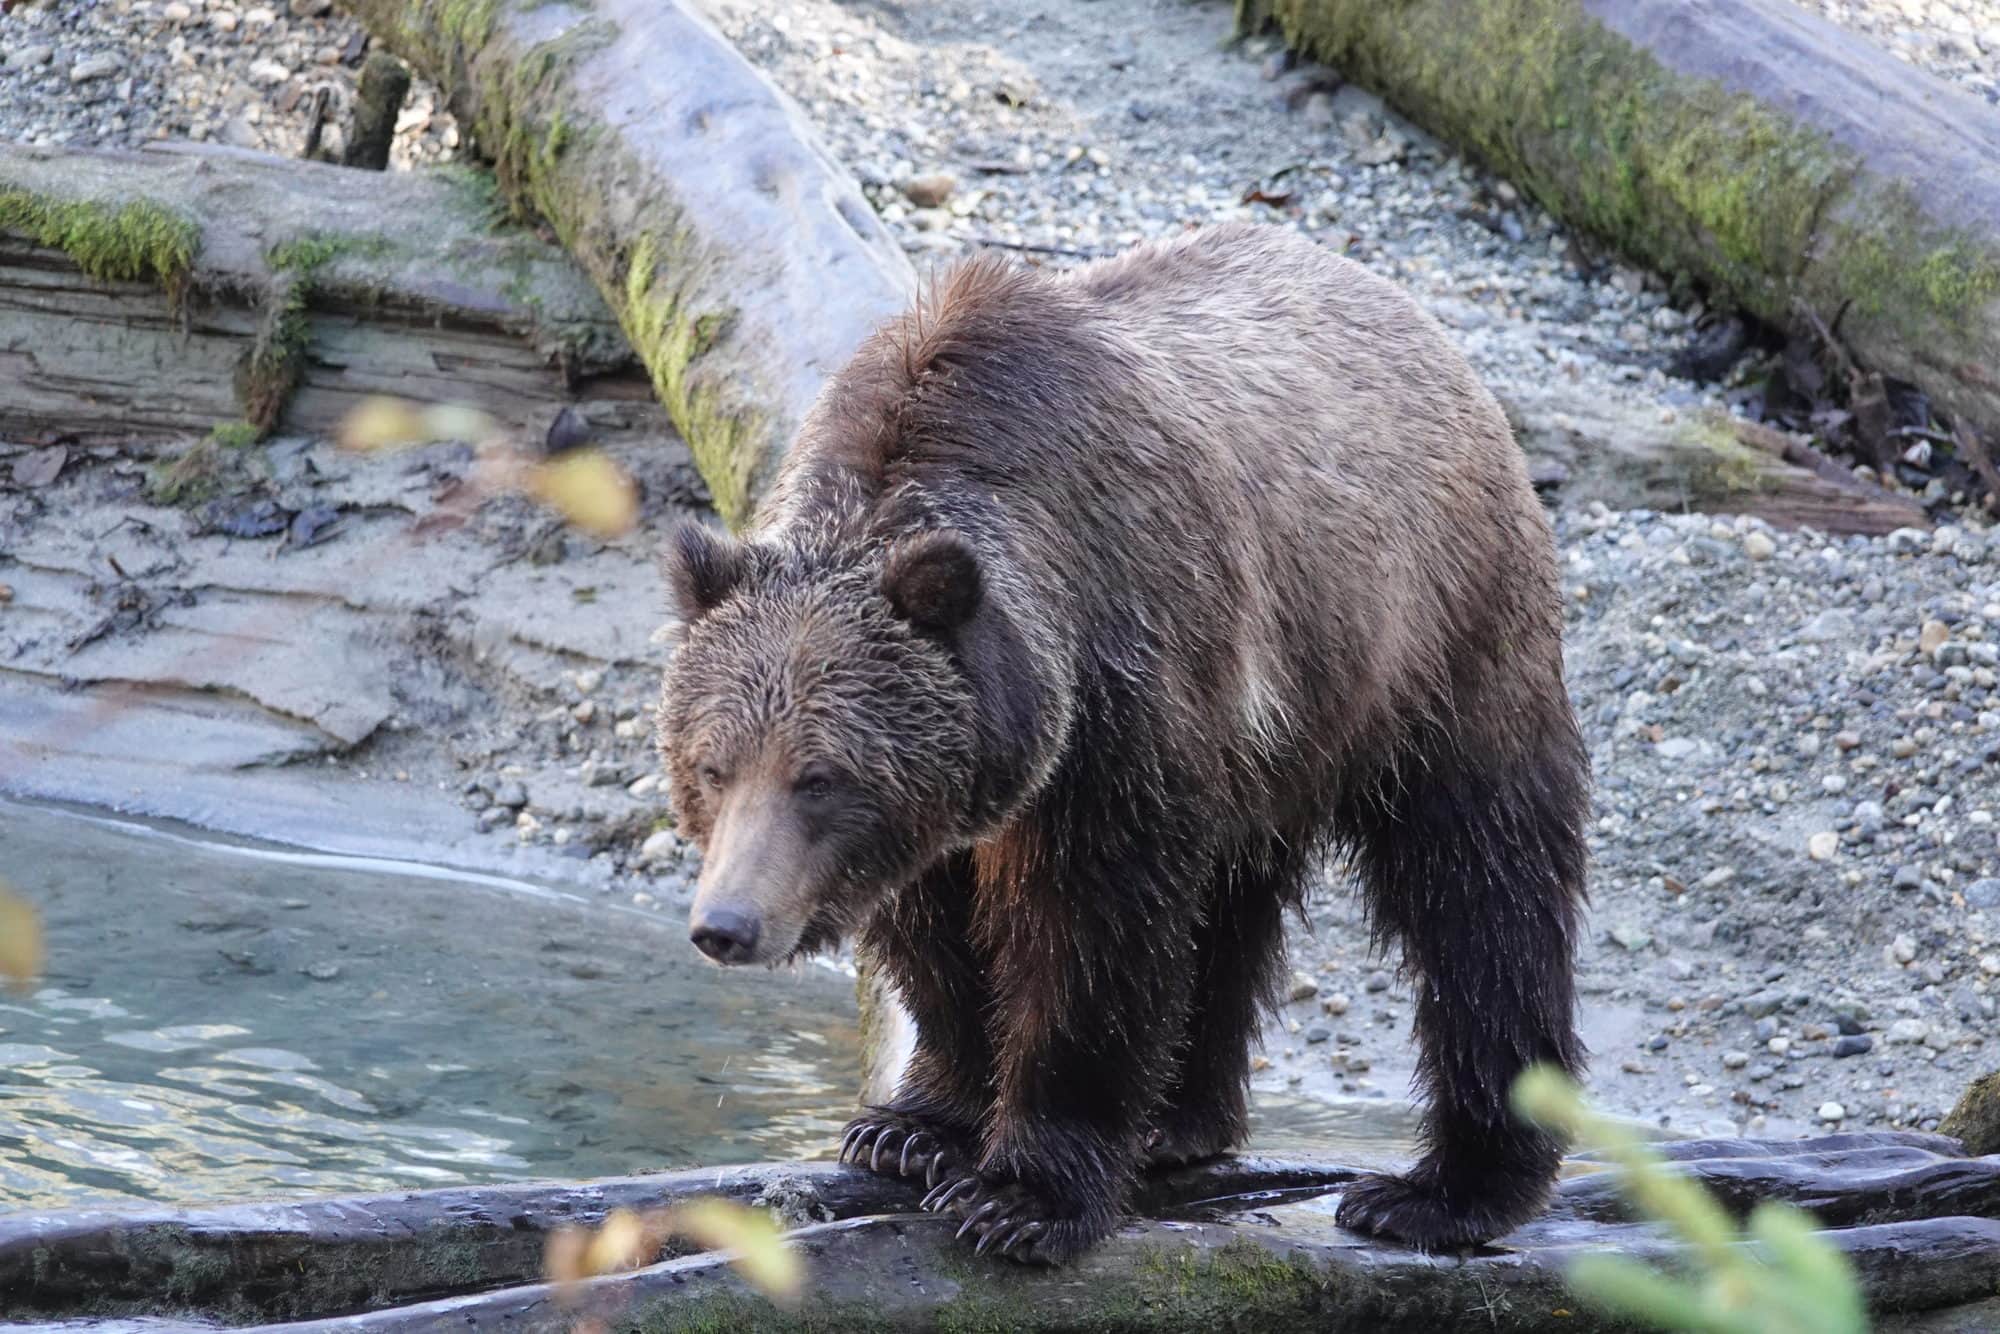 Grizzly Bear standing on log on the river. Background is logs on a rocky riverbank.